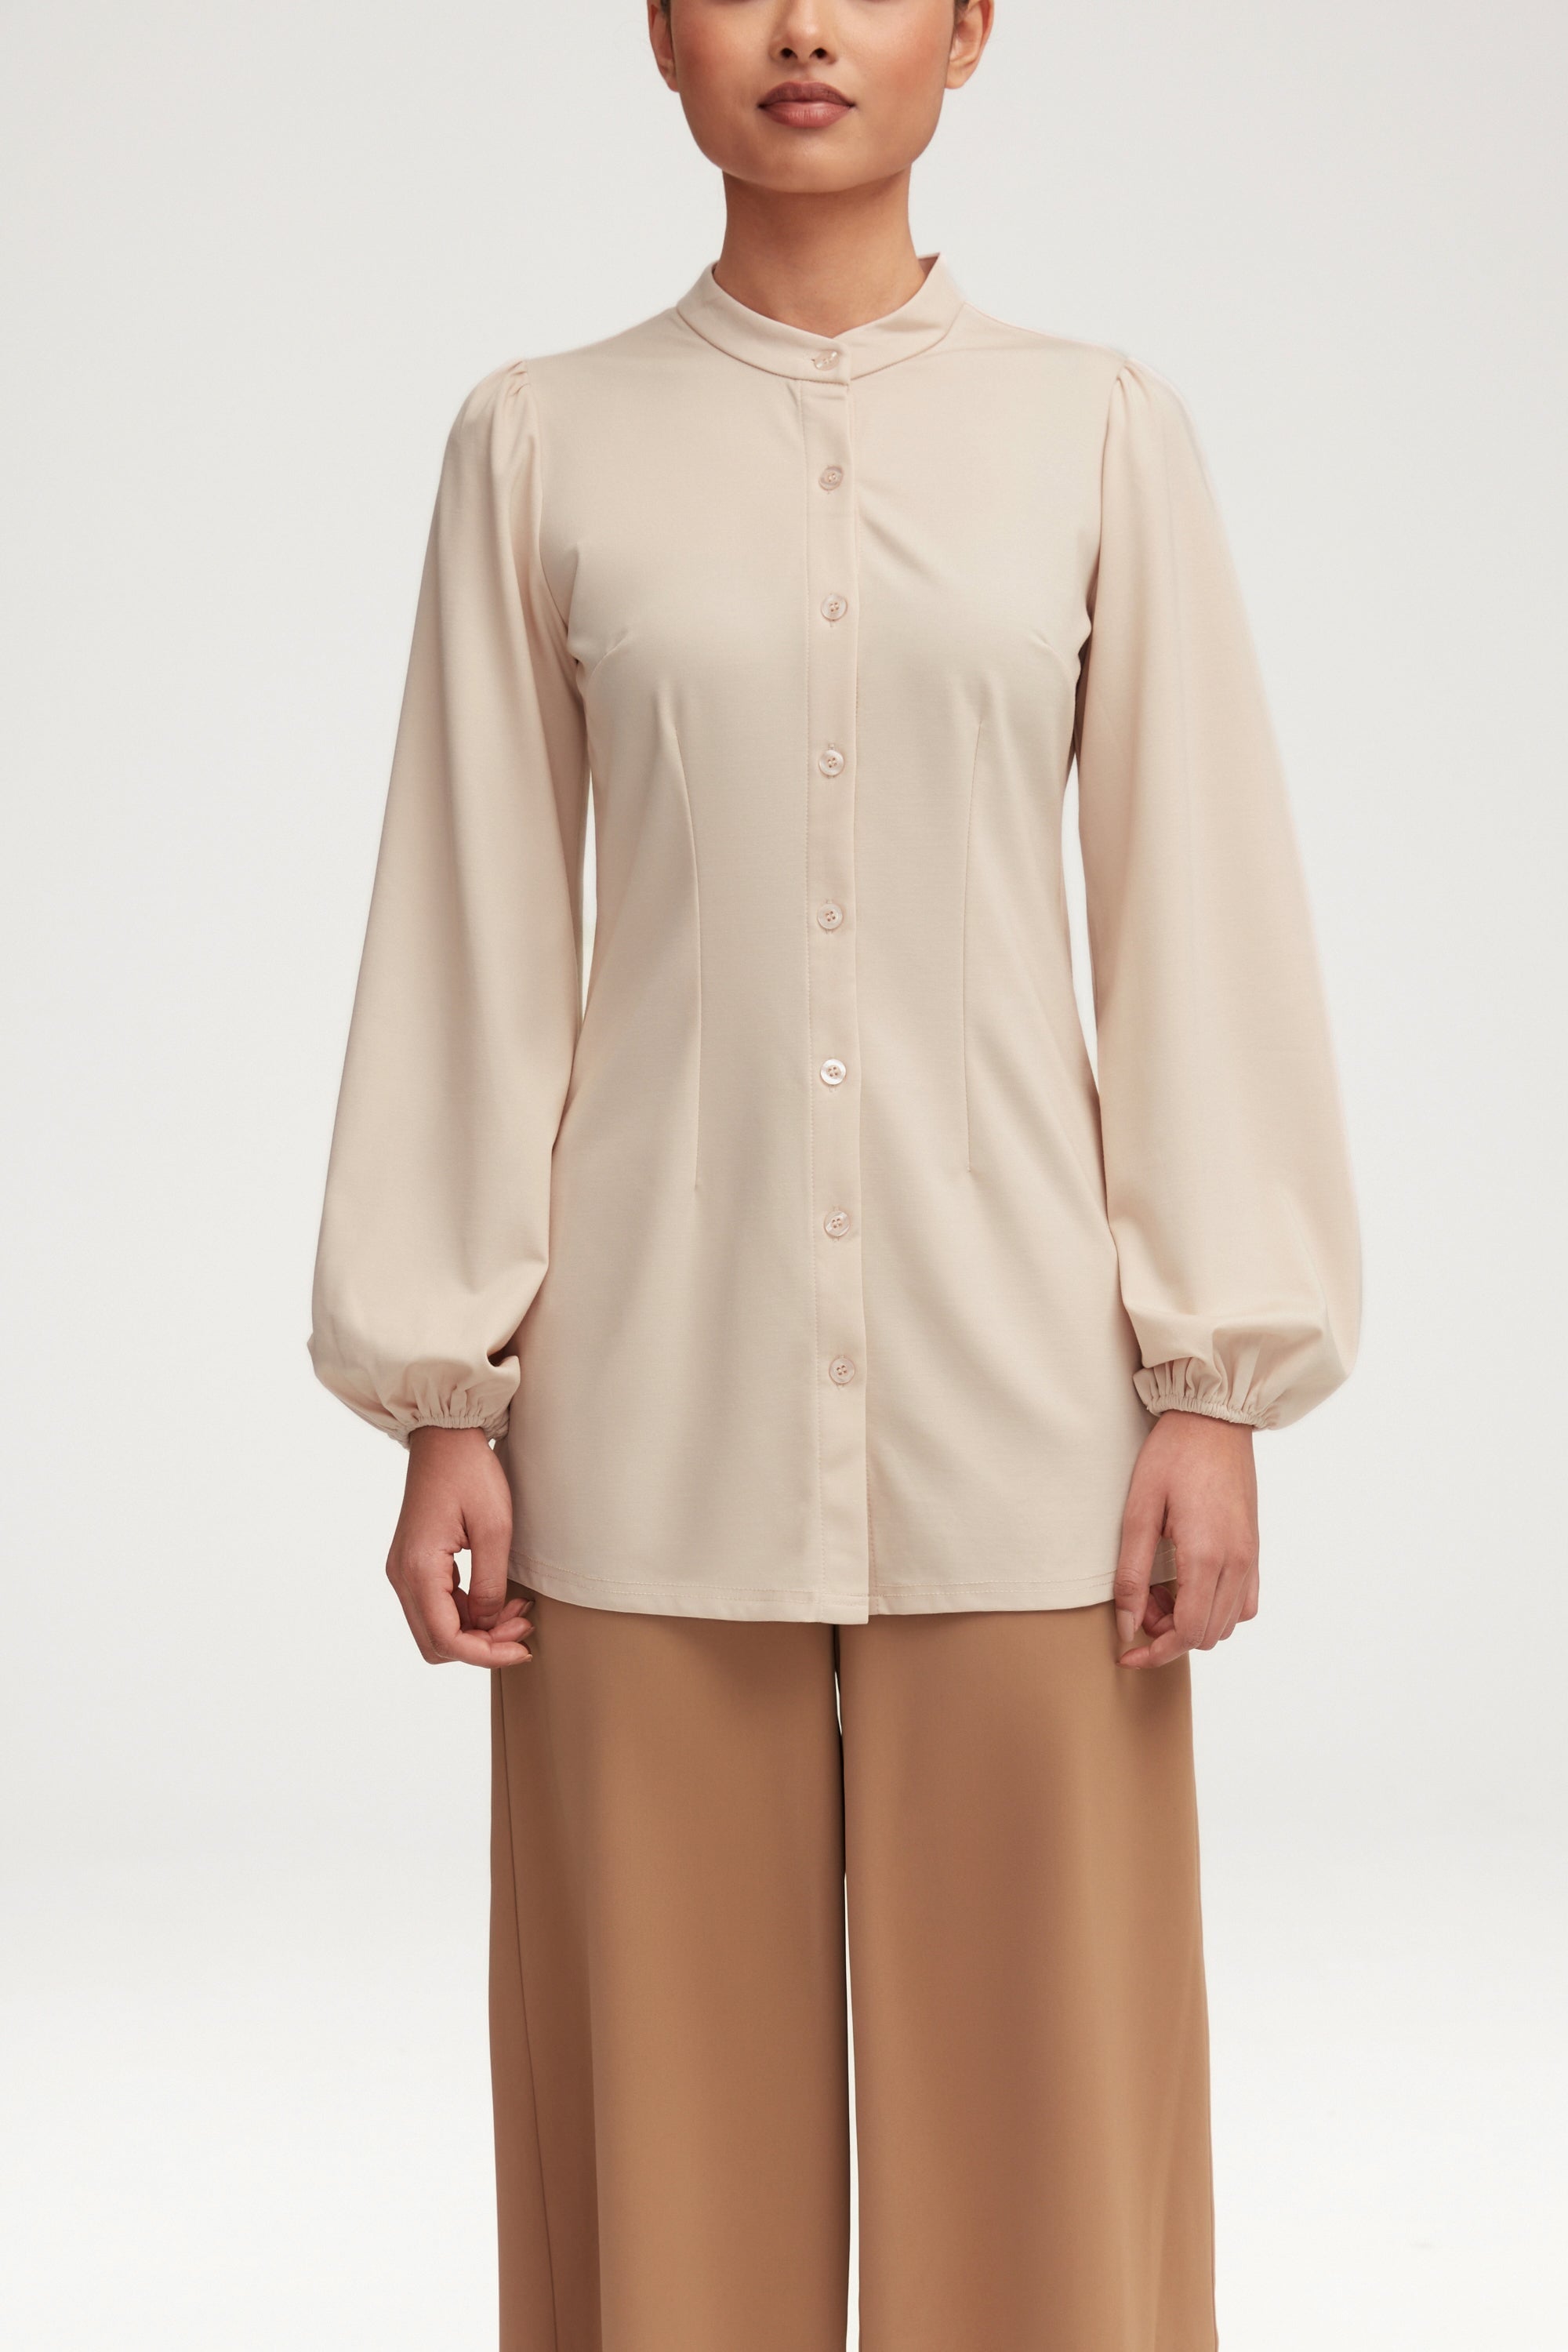 Rayana Jersey Button Down Top - Light Sand Clothing Veiled 